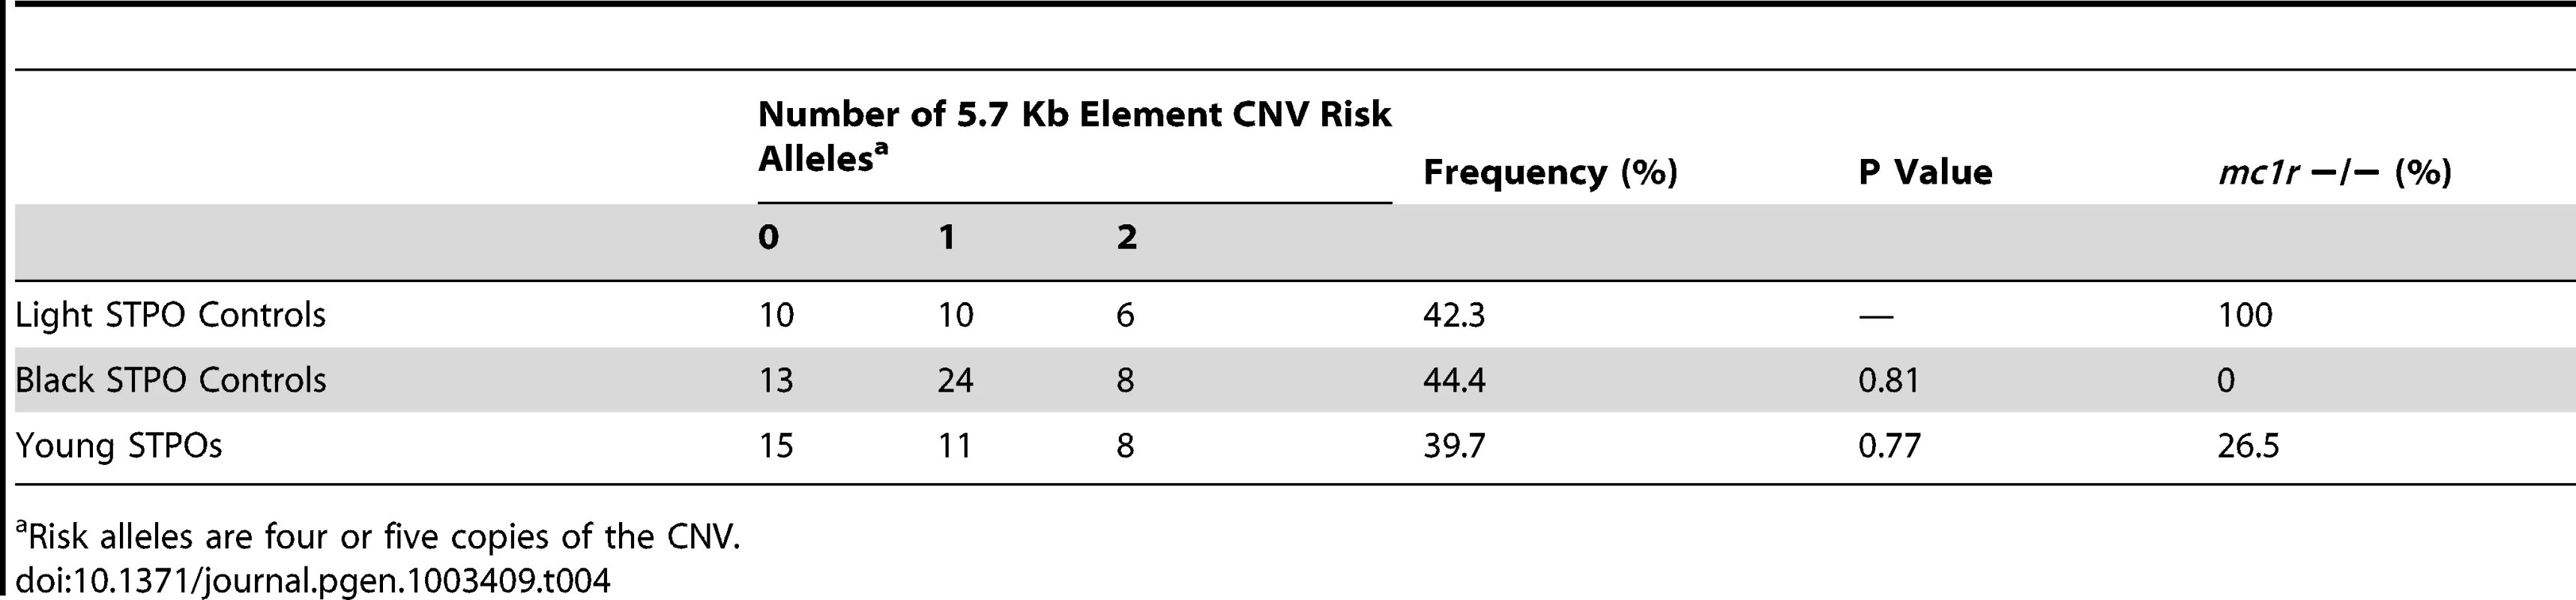 Frequency of the 5.7-Kb element CNV in light colored, black, and young STPOs.